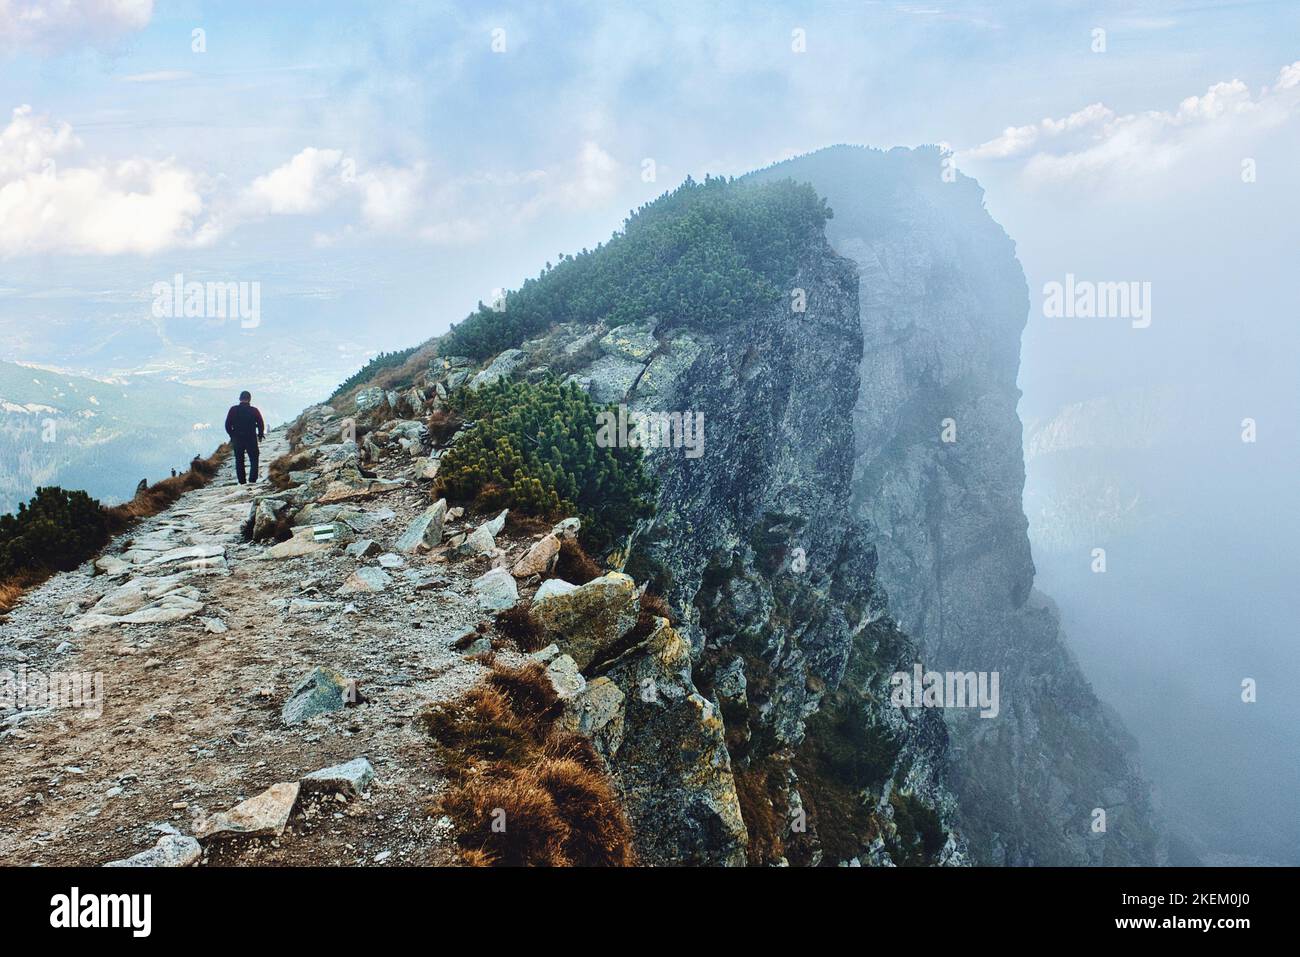 Lone hiker walking rocky mountain trail with steep rocky cliffs nearby covered in heavy fog and Poland, Zakopane town in distance in Tatra mountains Stock Photo